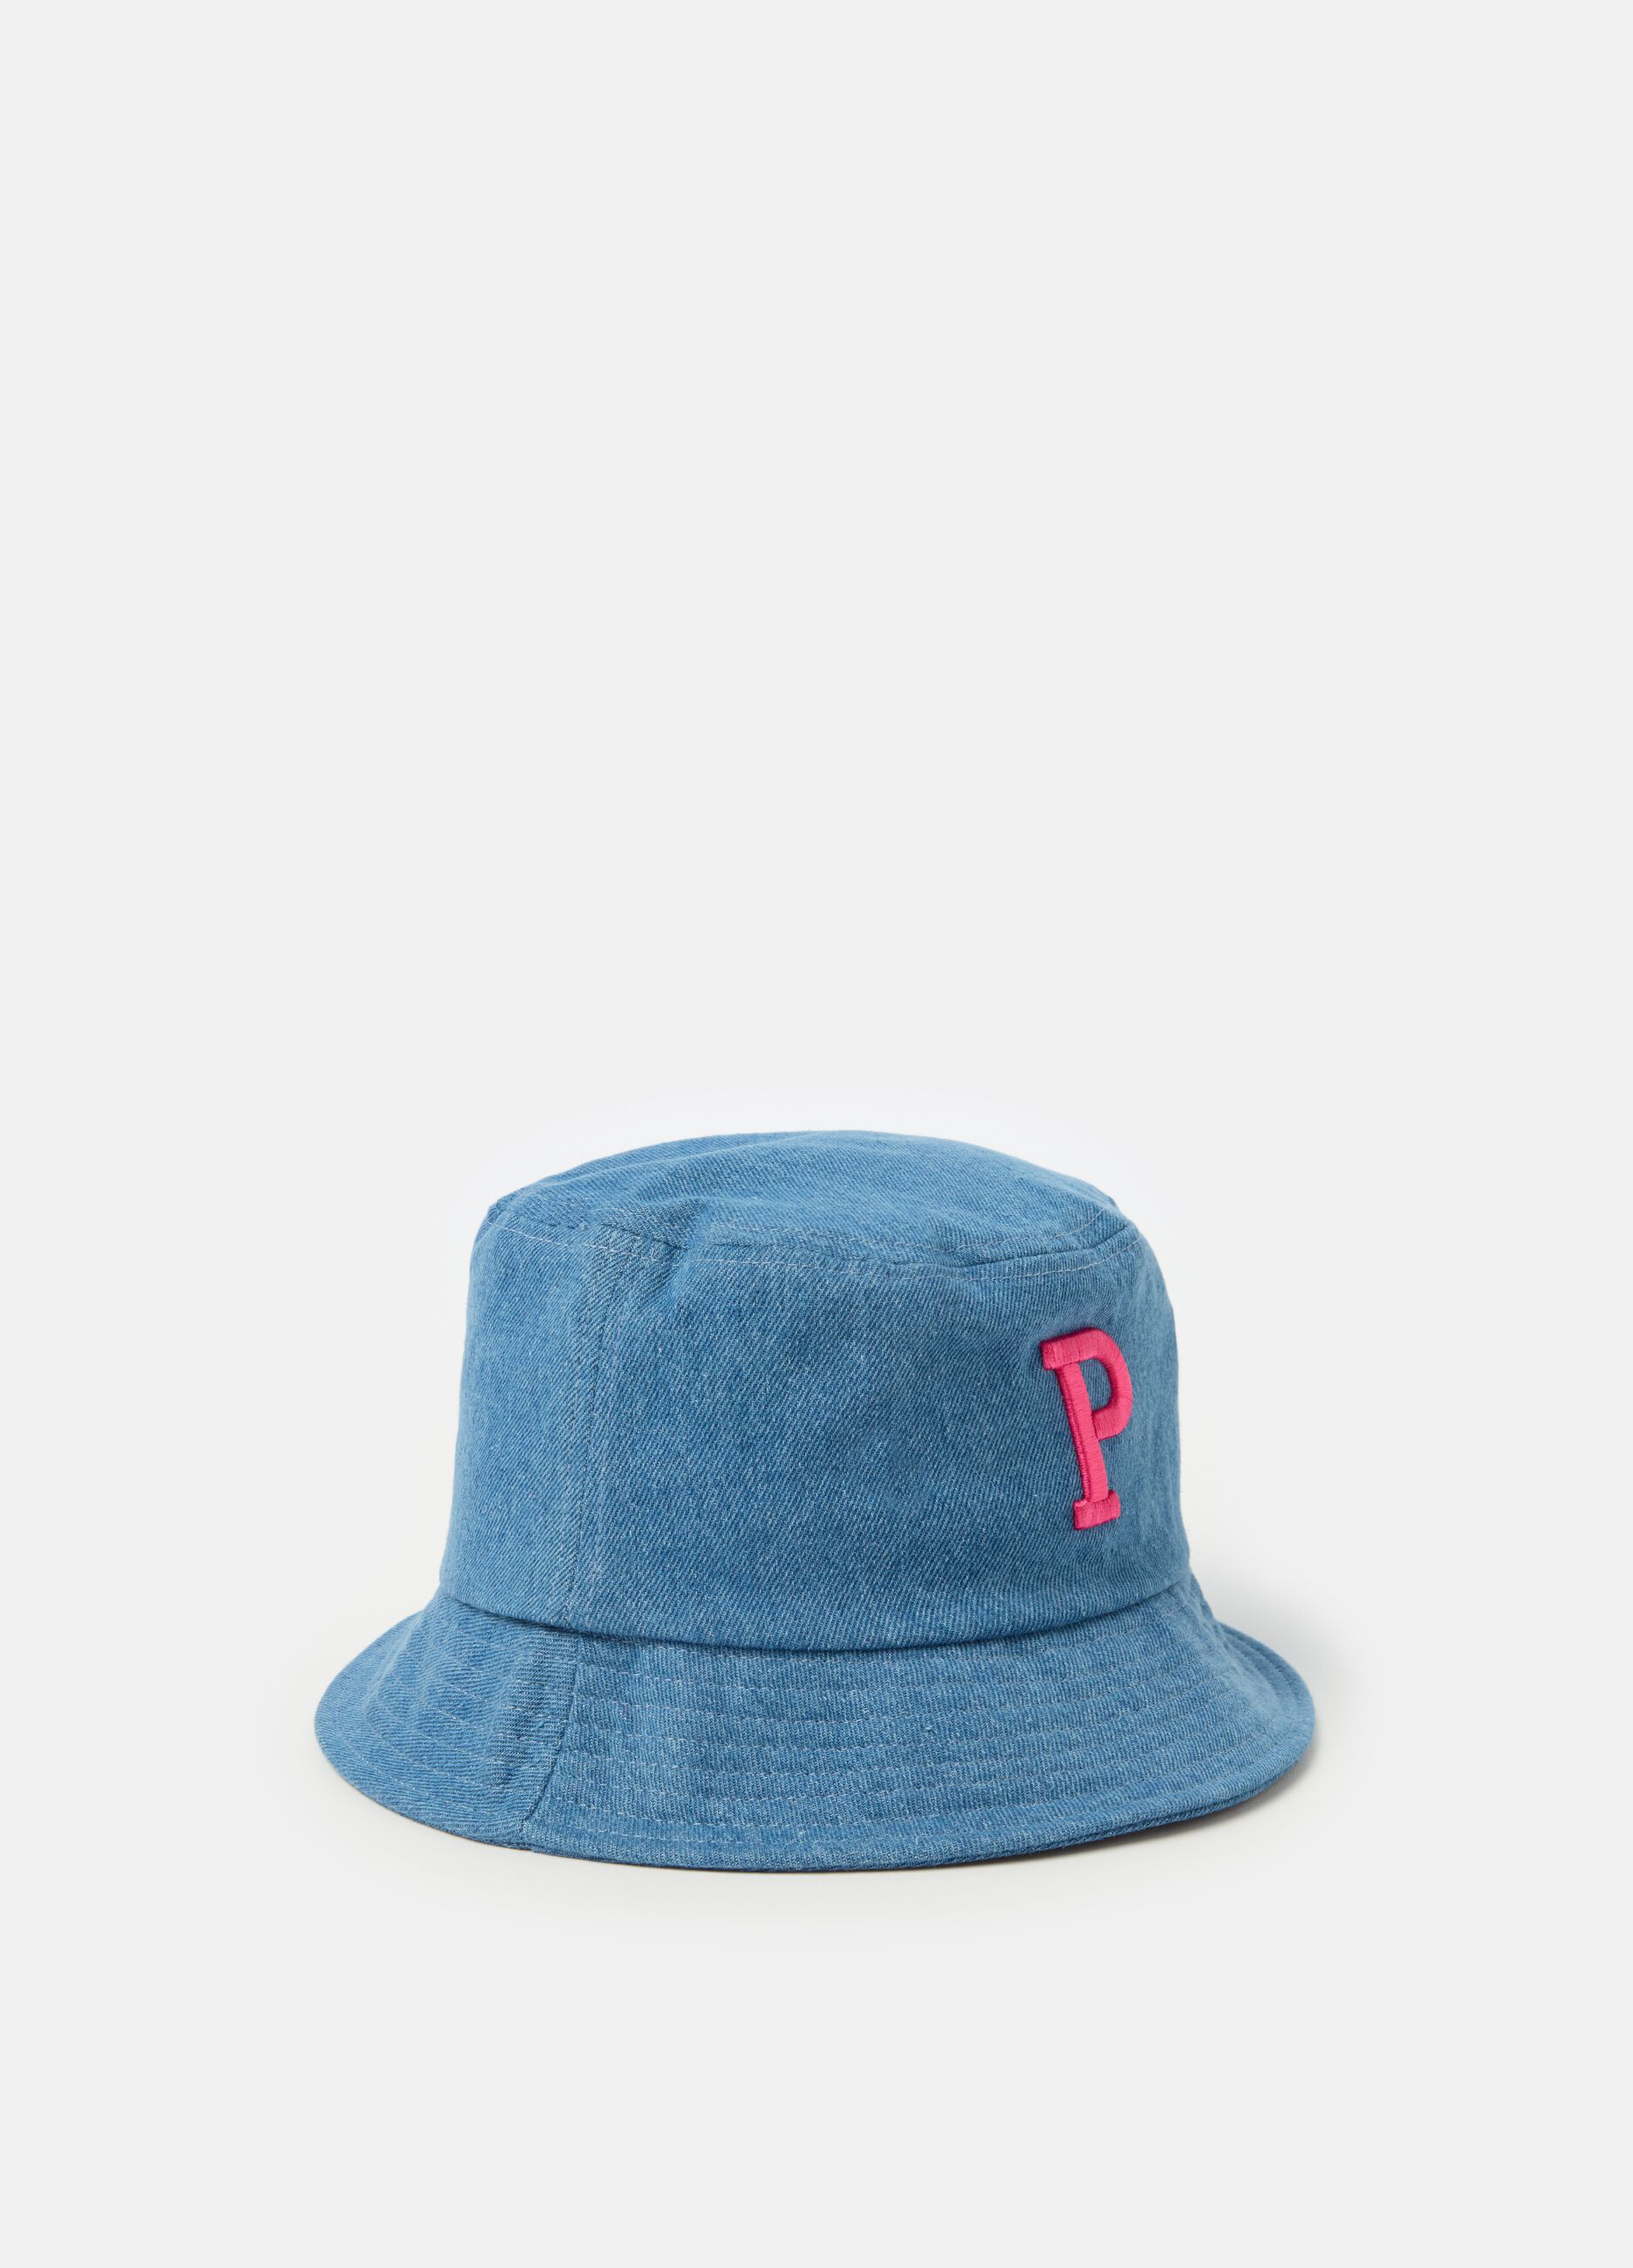 Denim hat with logo embroidery